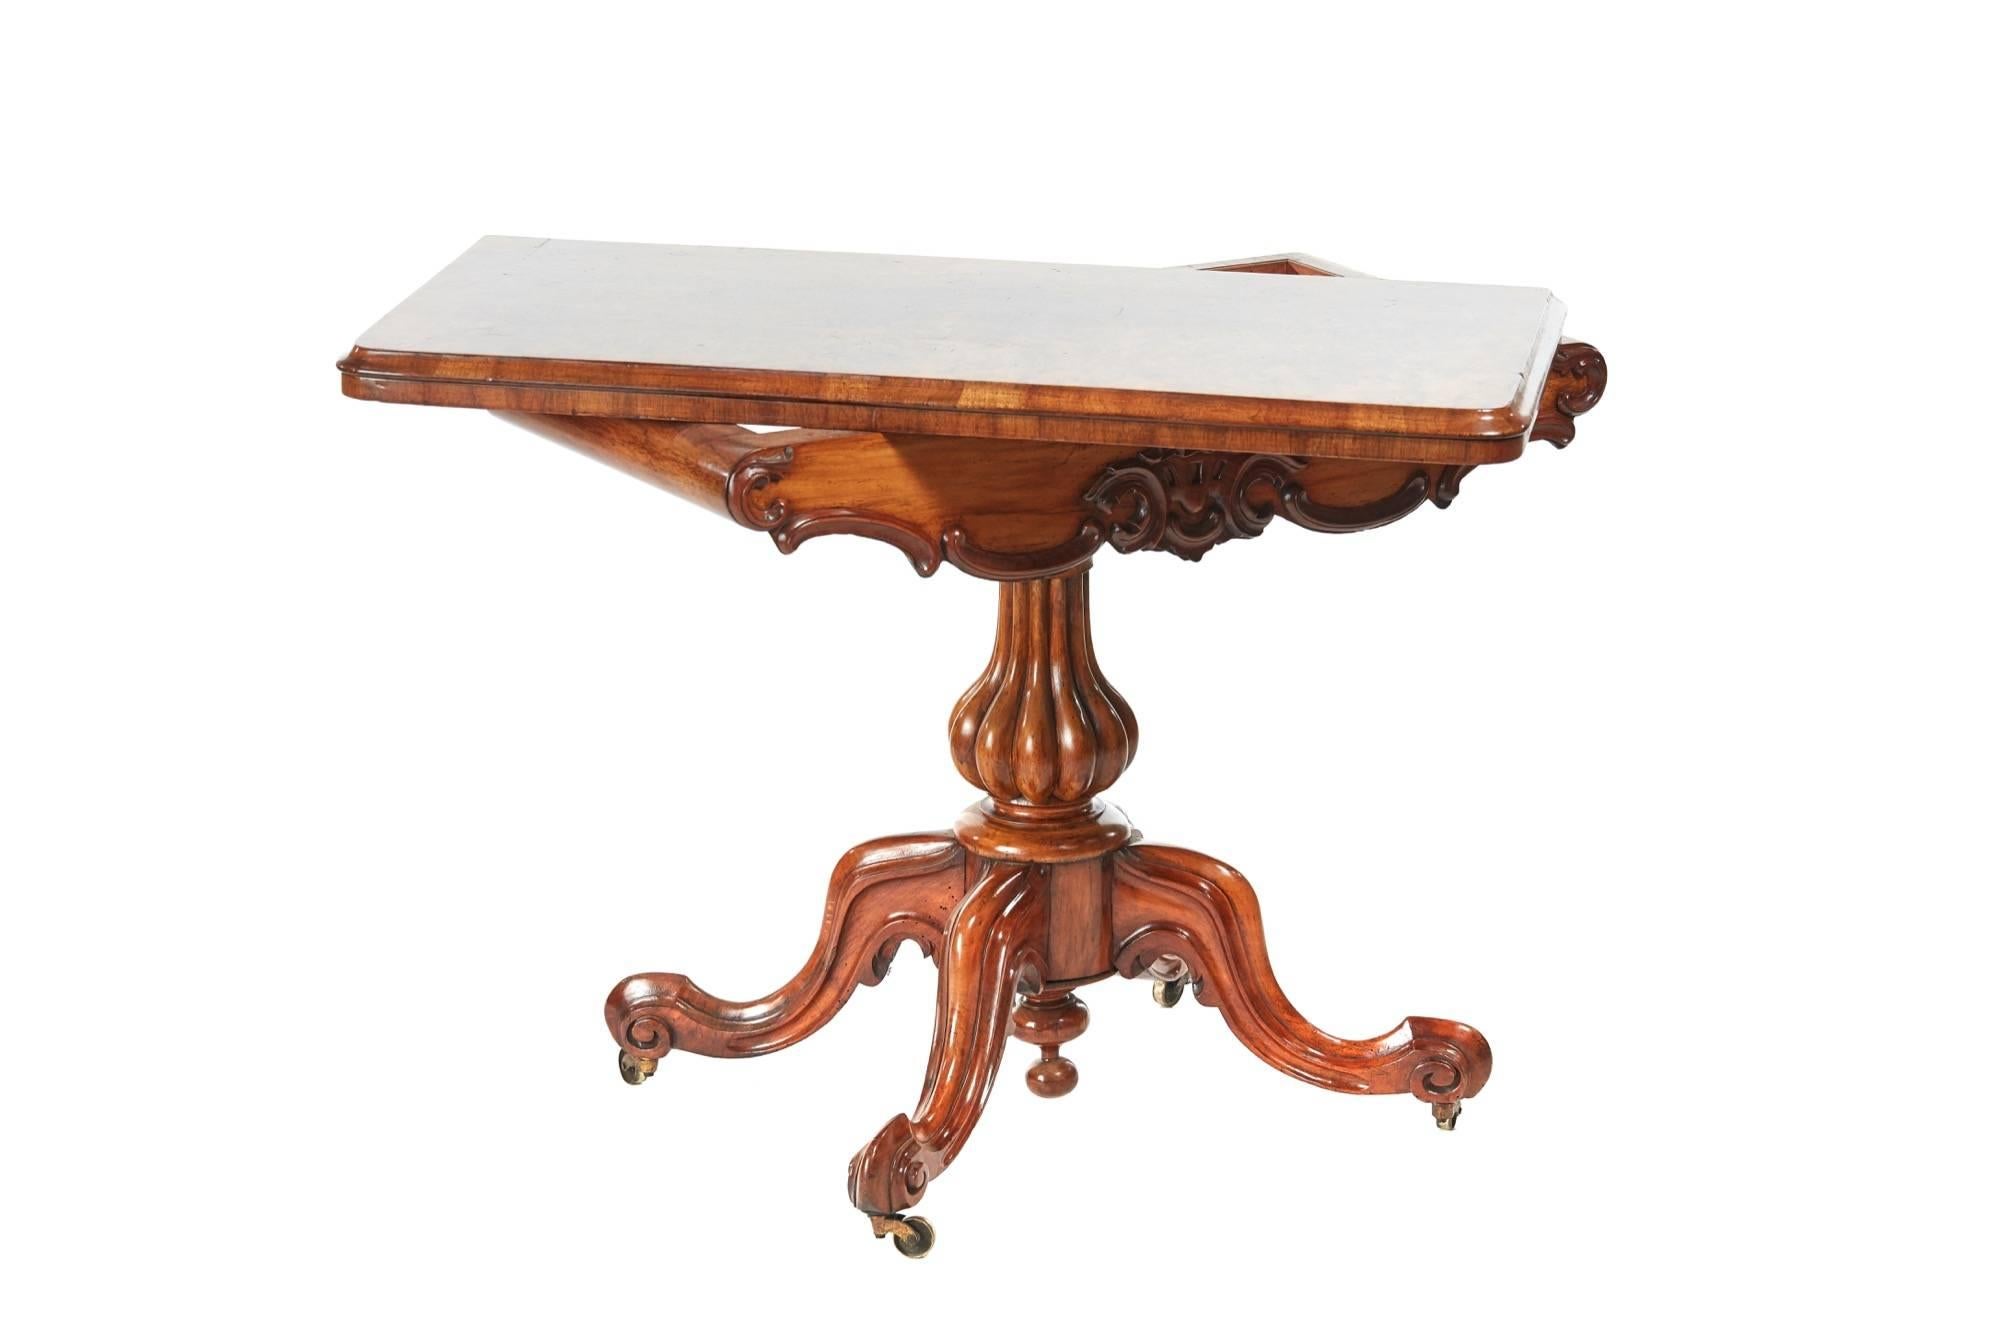 Fine quality Victorian burr walnut tea table, with a fantastic burr walnut swivel top opening to reveal a fantastic burr walnut interior, serpentine carved frieze, shaped receded column supported by four carved shaped cabriole legs on original